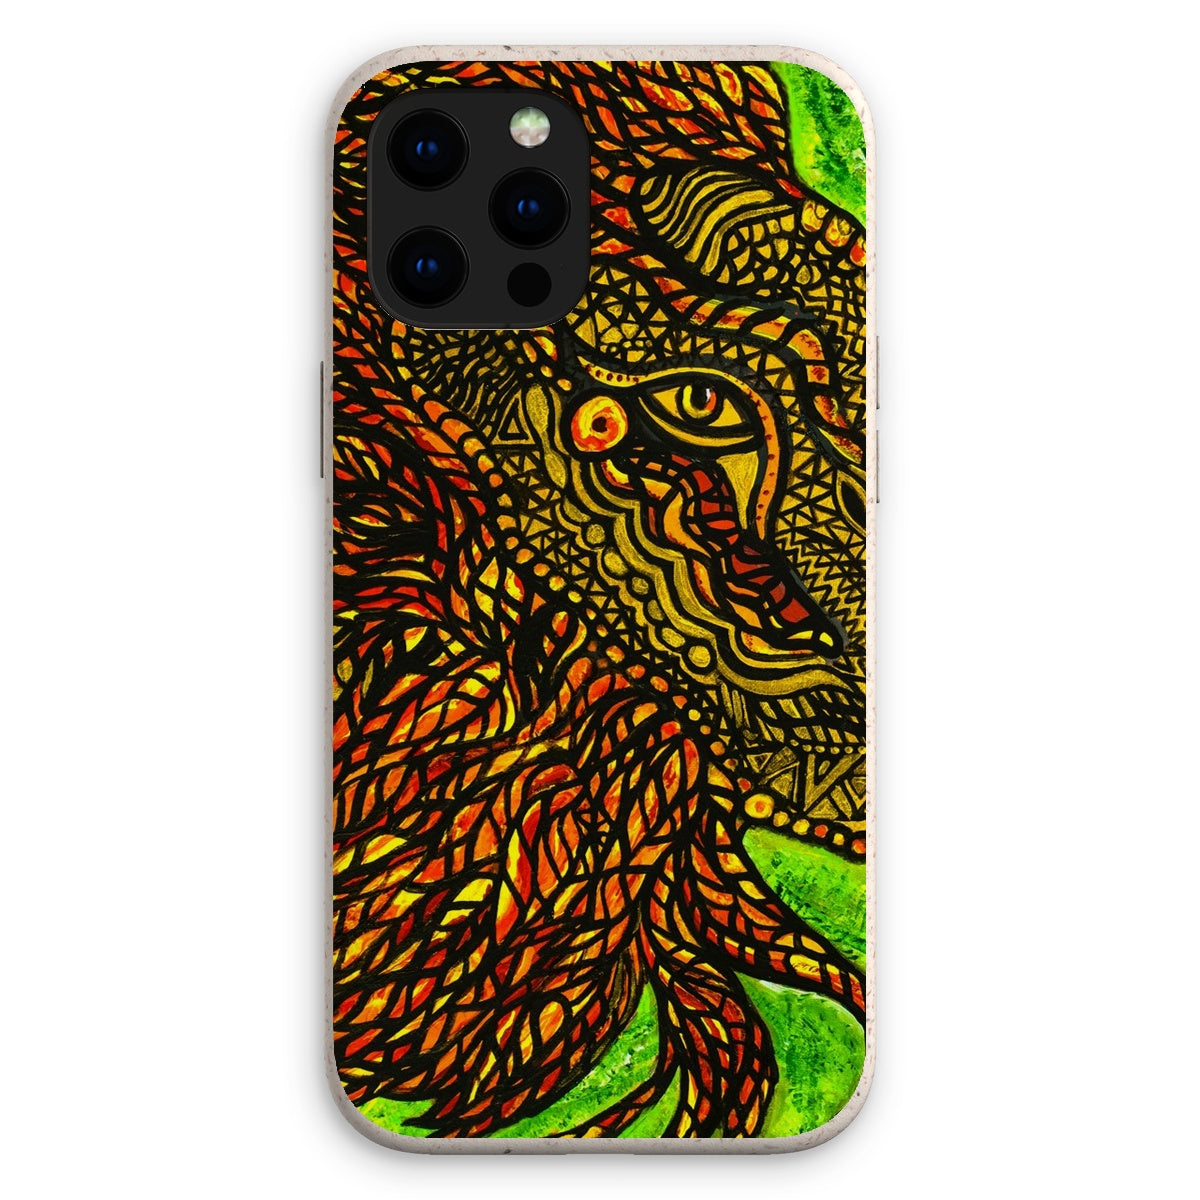 The Lions Match Eco Phone Case